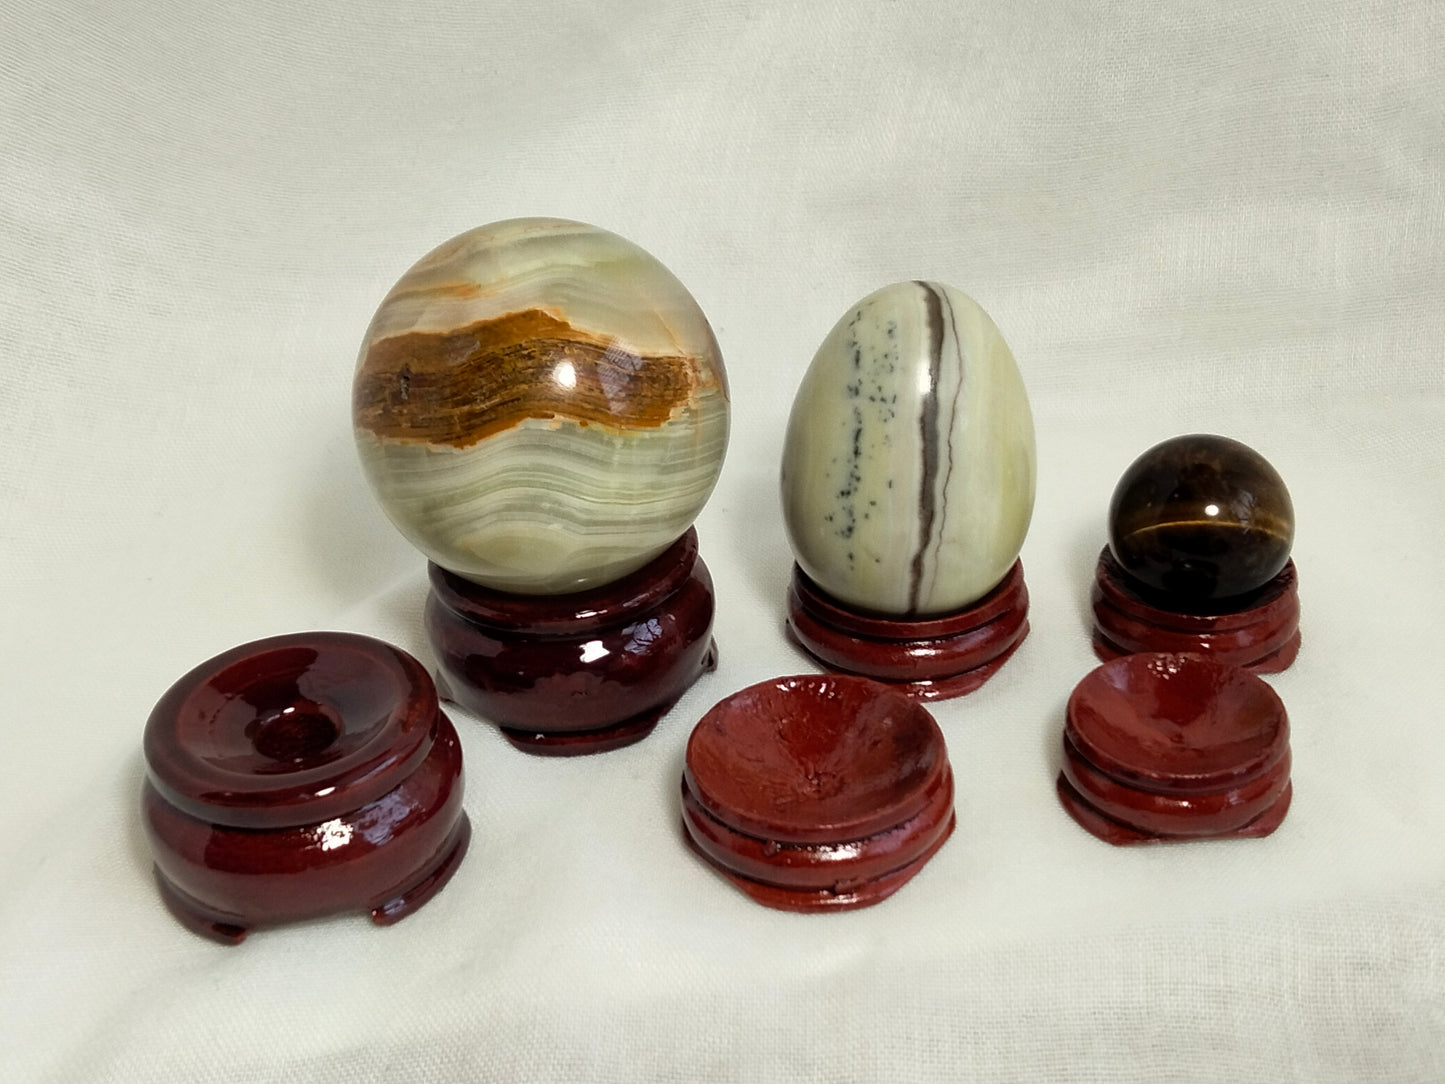 Sphere/Egg-Shaped Stone Wood Stand - 1/2" high X 1-1/8" round